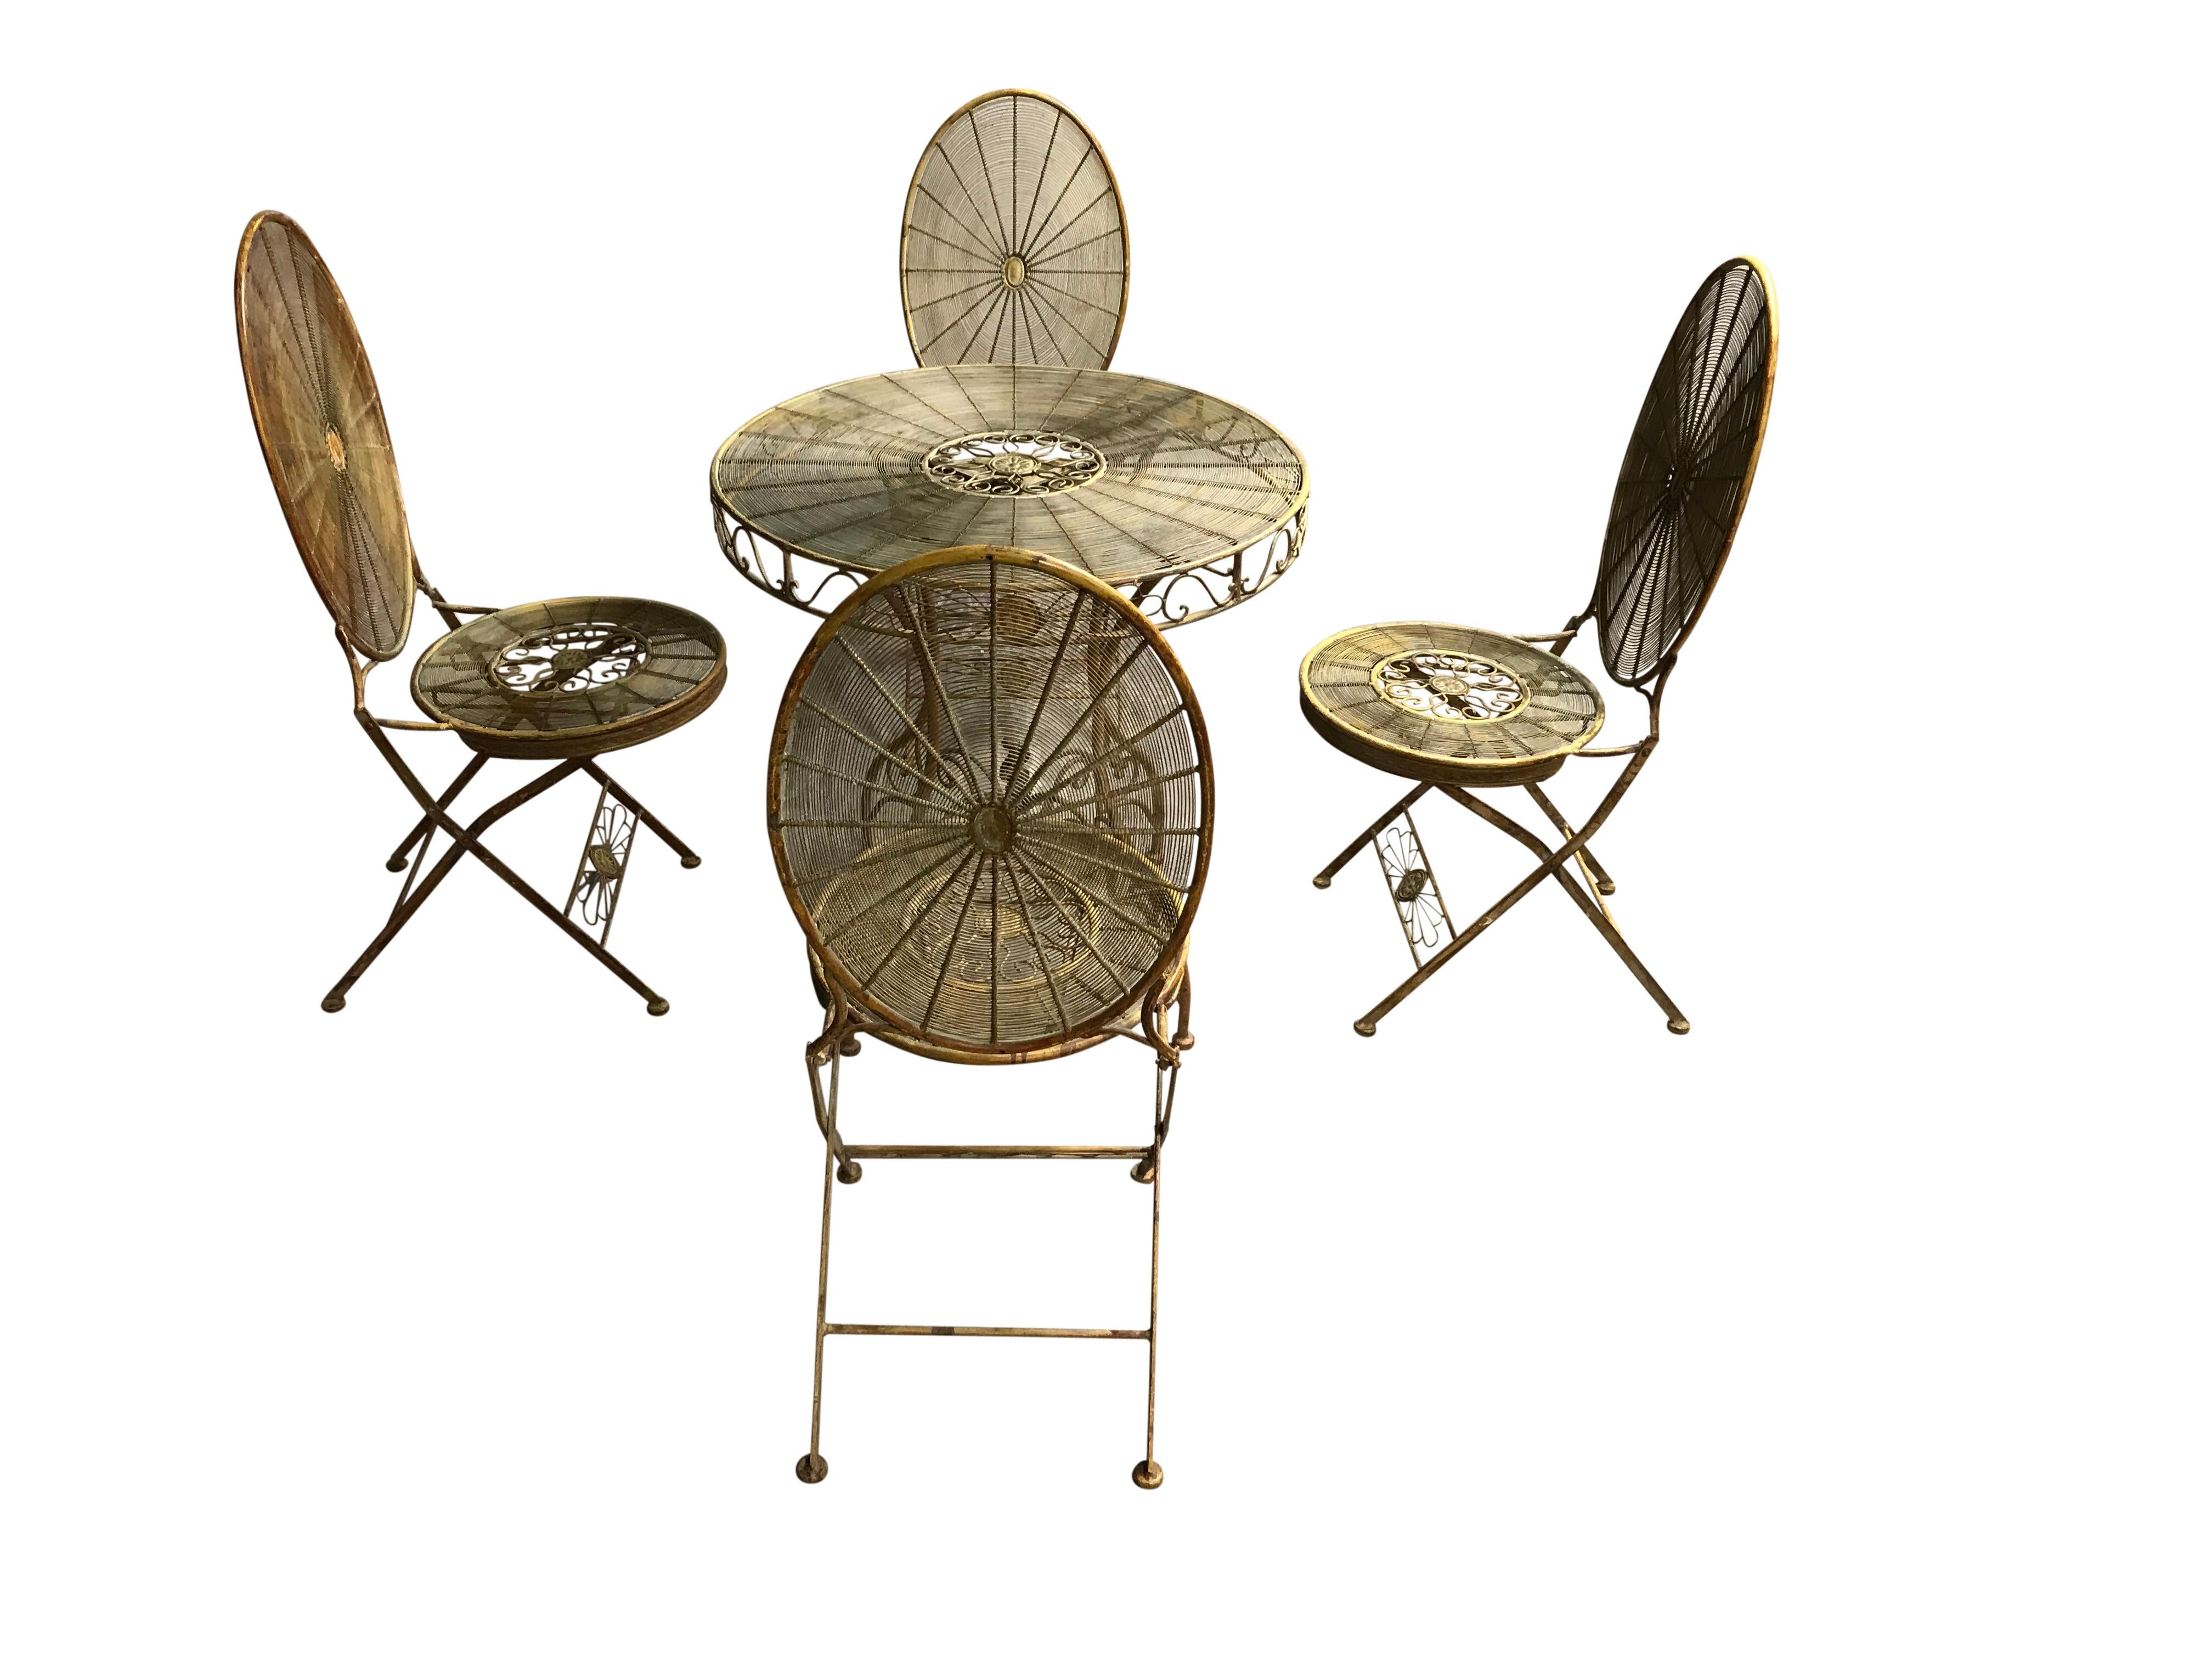 Vintage wrought iron garden or patio set.

Elegant shaped legs with metal wire seats, backrests and tabletop.

This set has the right patinated look and is not 'super' heavy, so it is easily usable.

The chairs are foldable.

The set has a